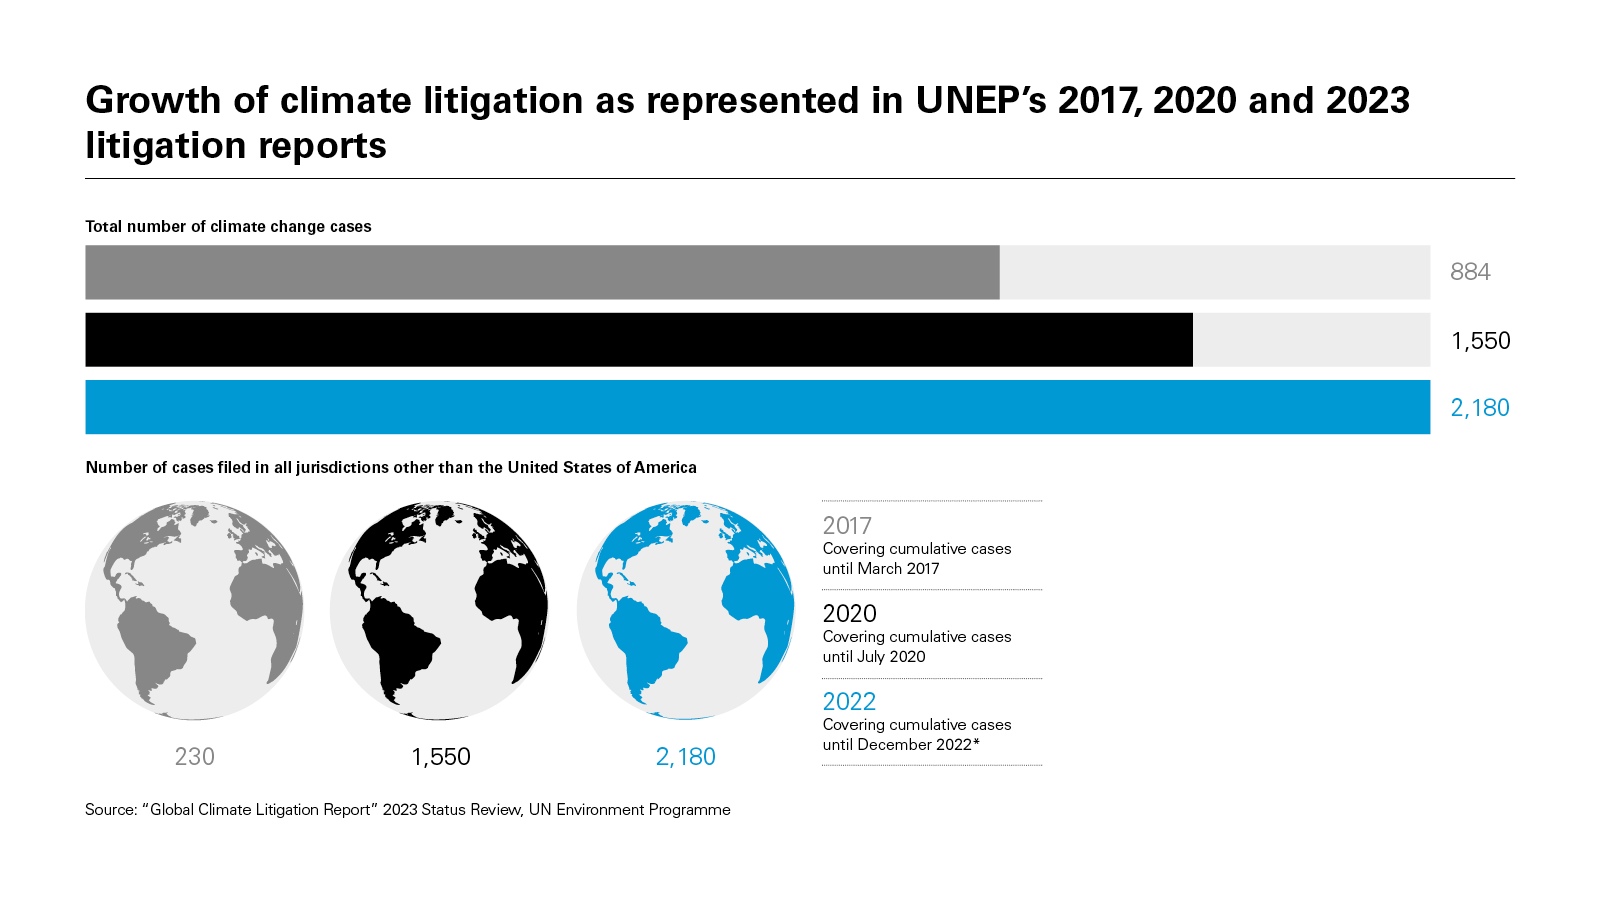 Growth of climate litigation as represented in UNEP’s 2017, 2020 and 2023 litigation reports